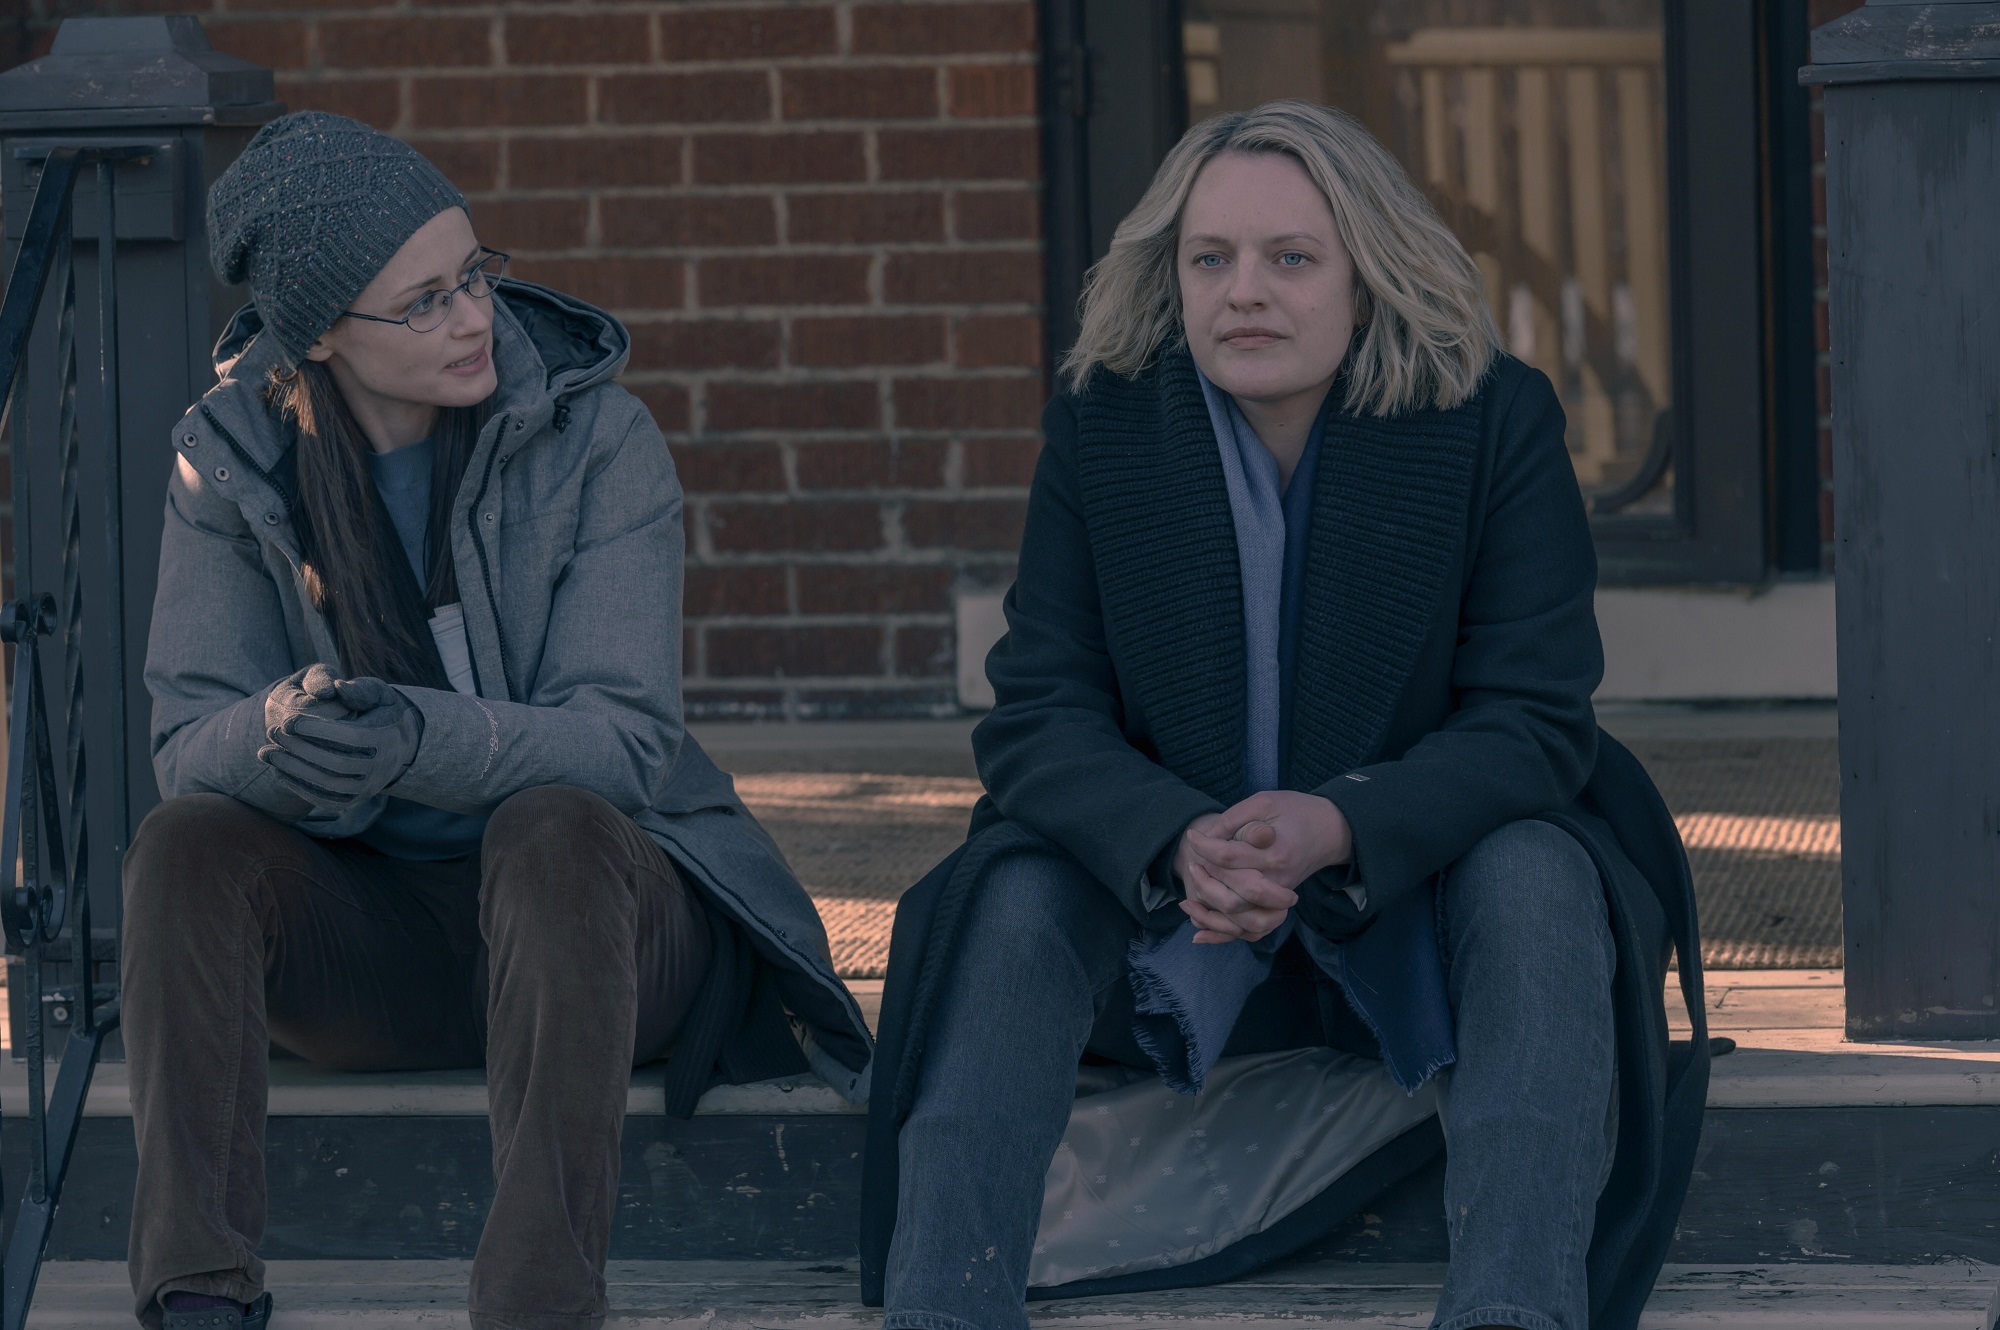 Emily and June sit on porch steps in 'The Handmaid's Tale'